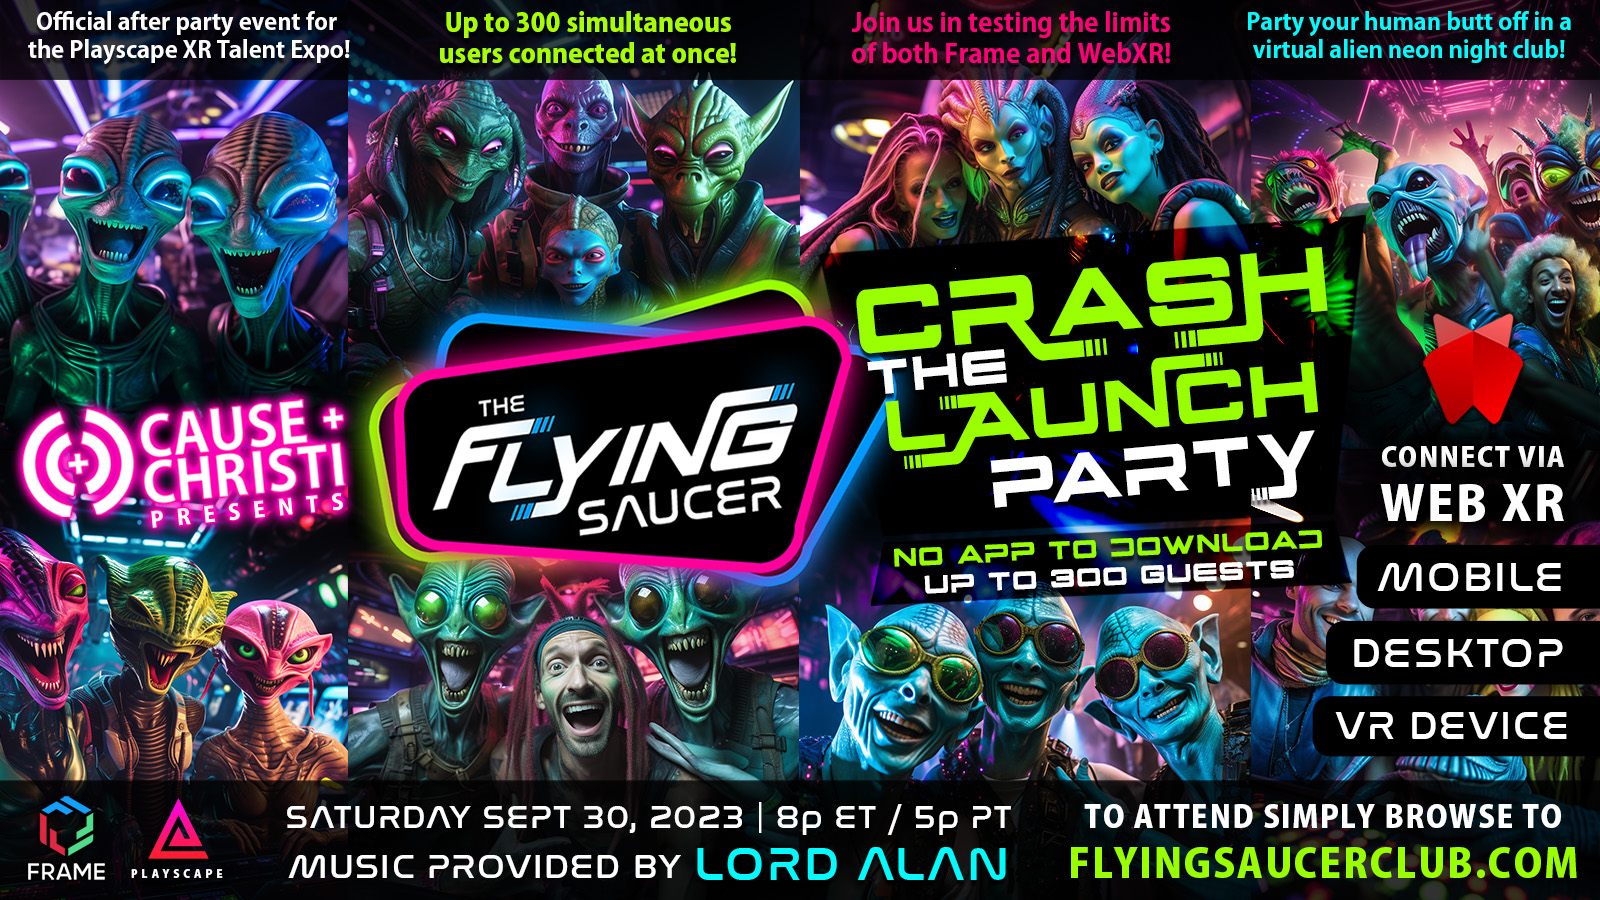 The Flying Saucer's "Crash The Launch" Party